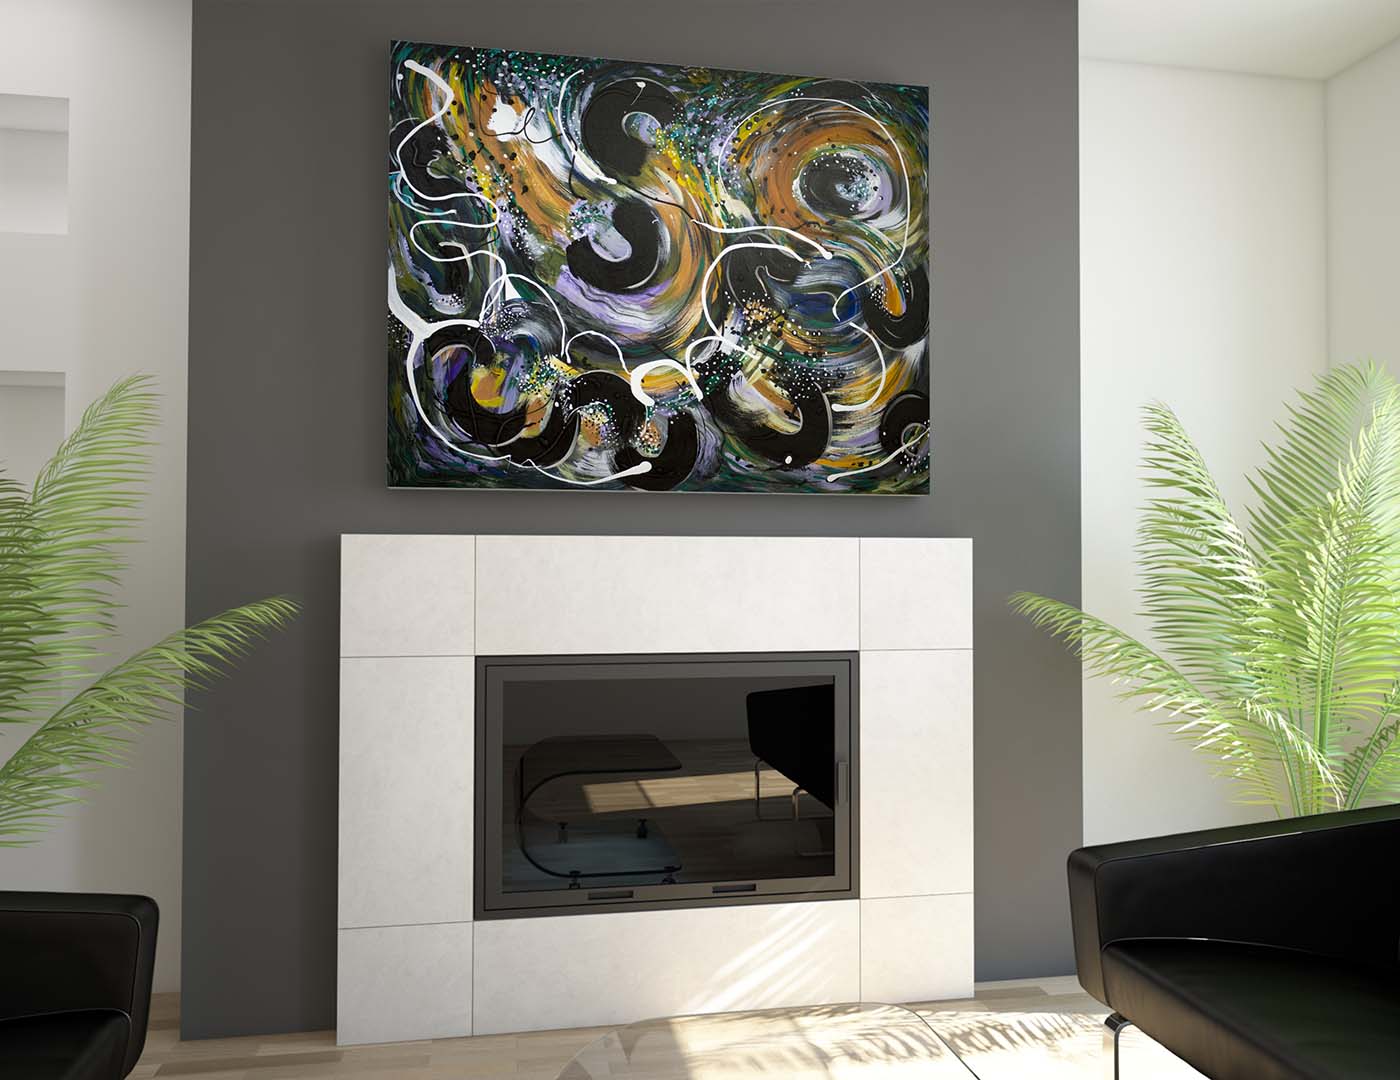 Silkworm Abstract painting by Doug LaRue over a fireplace